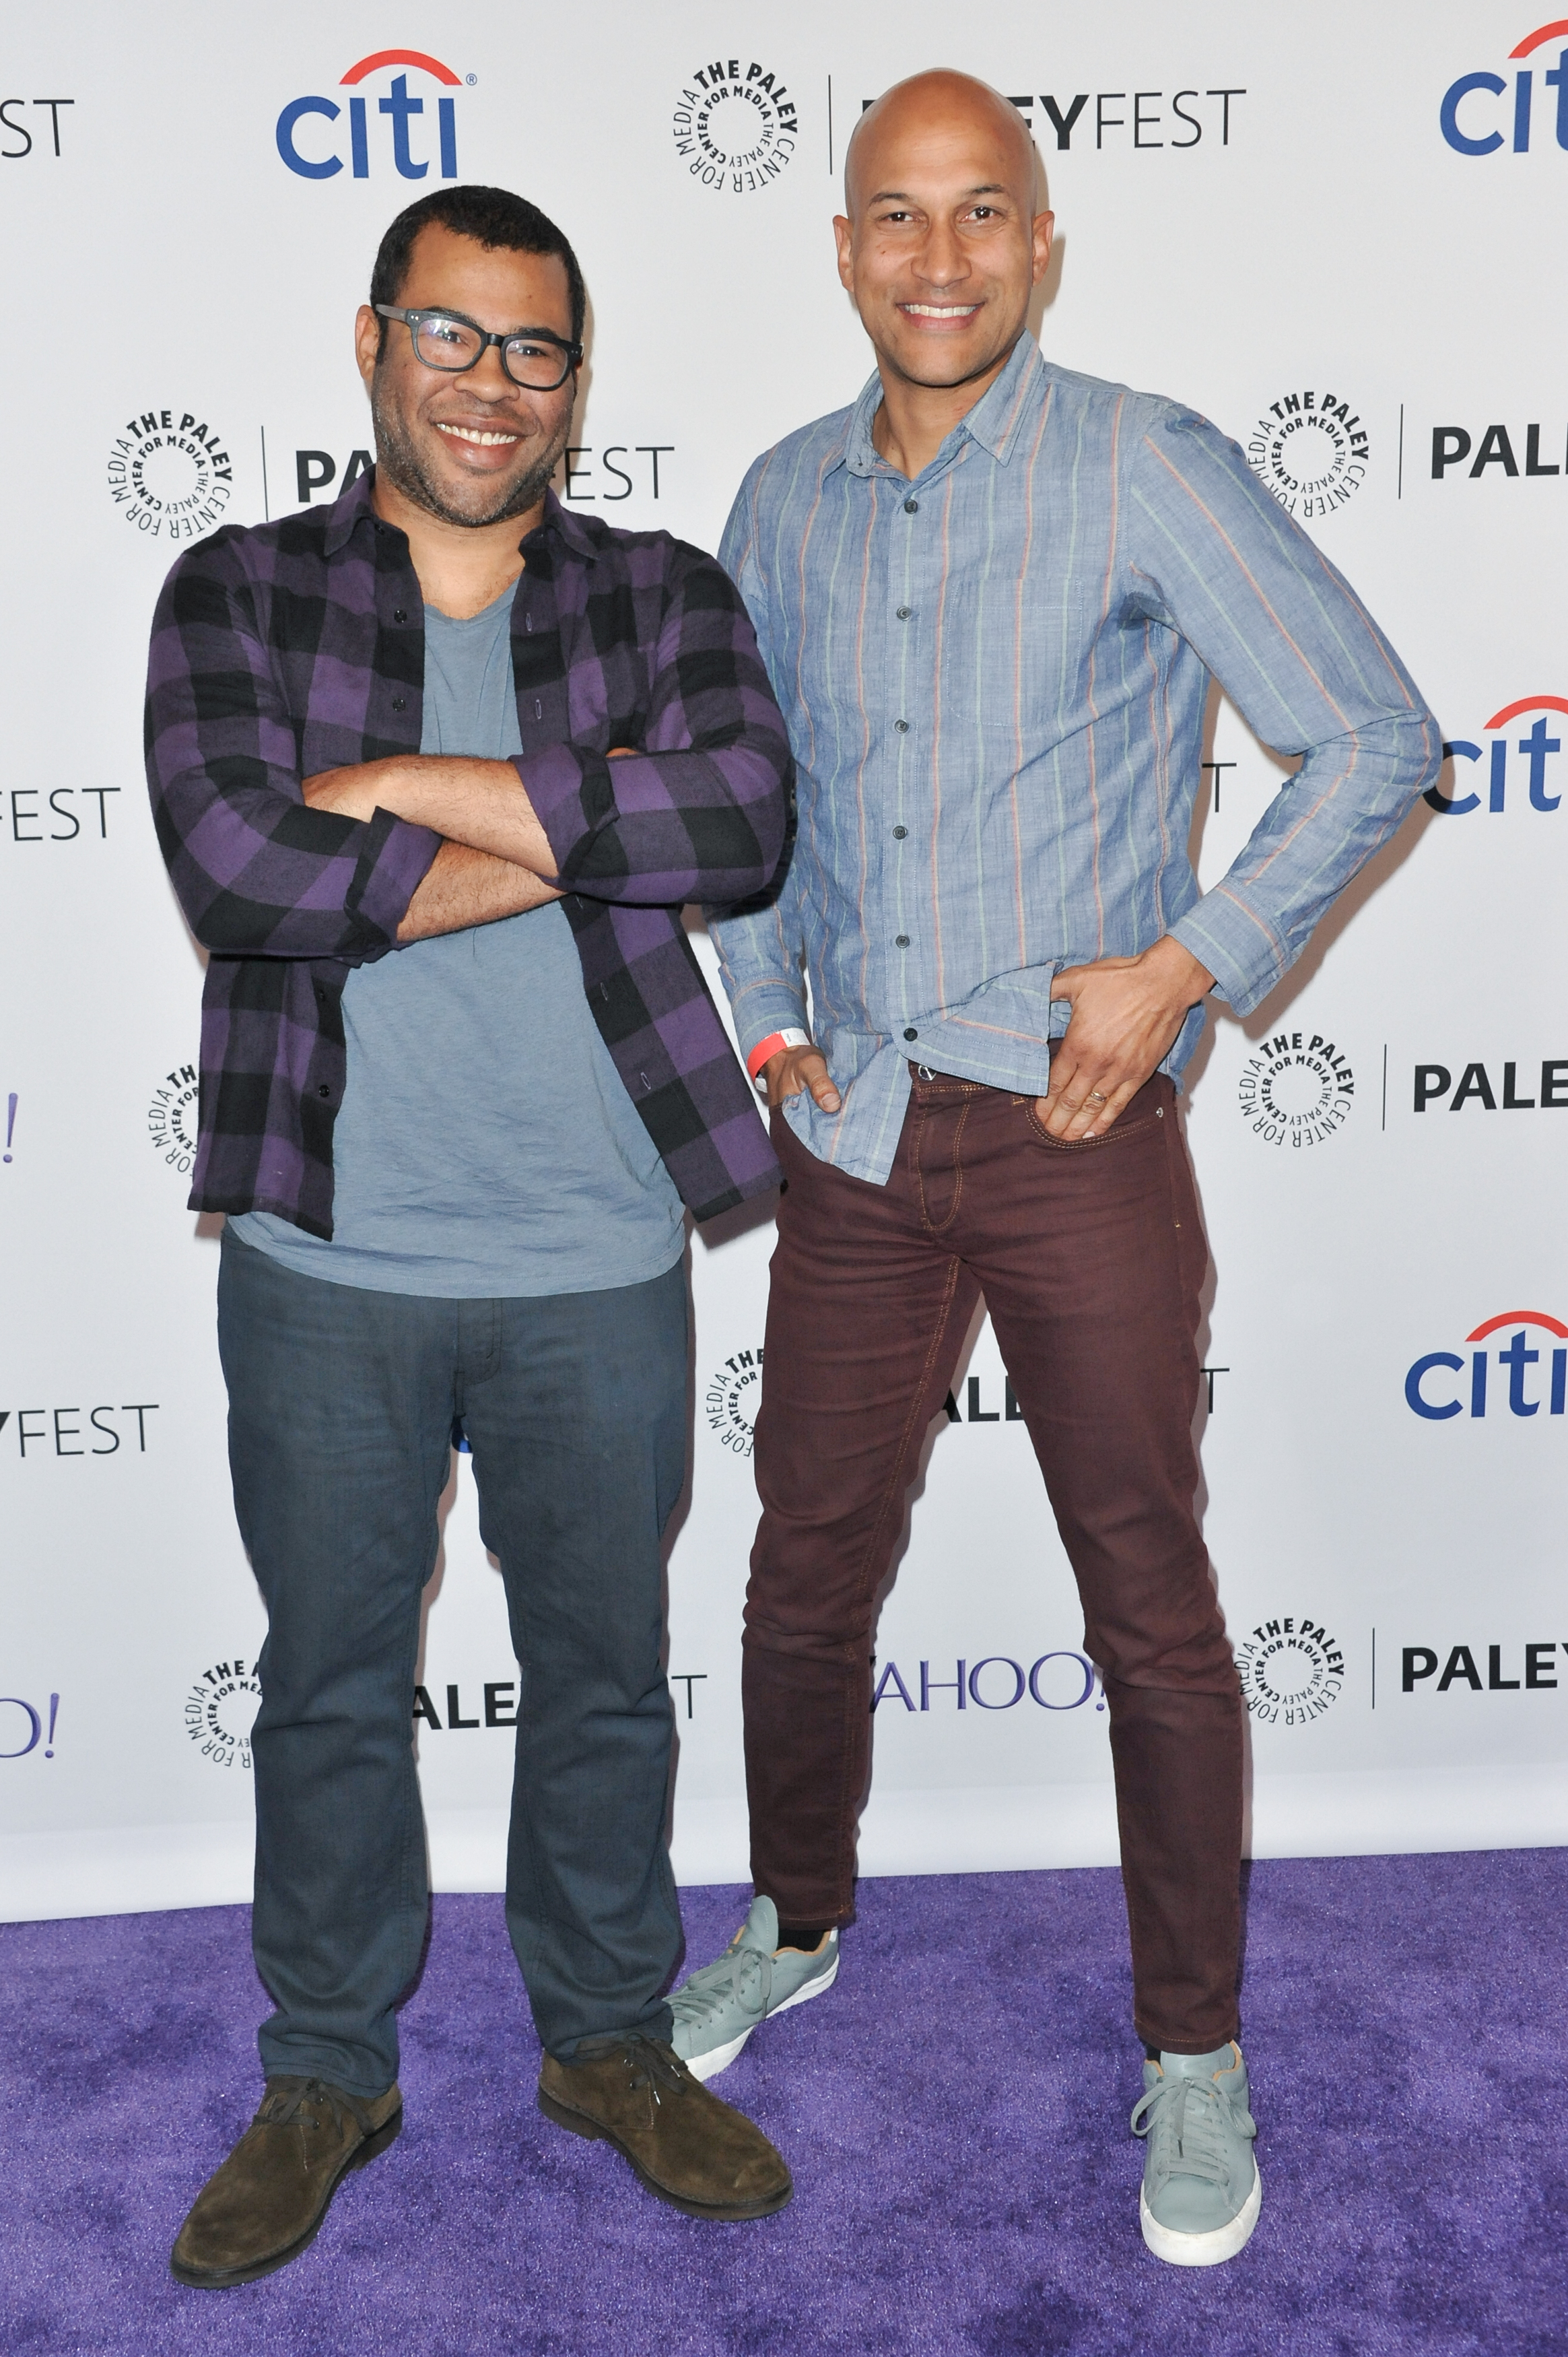 Jordan Peele (L) and Keegan-Michael Key (R) arrive at the 32nd Annual Paleyfest : "A Salute to Comedy Central" in Los Angeles on March 7, 2015.